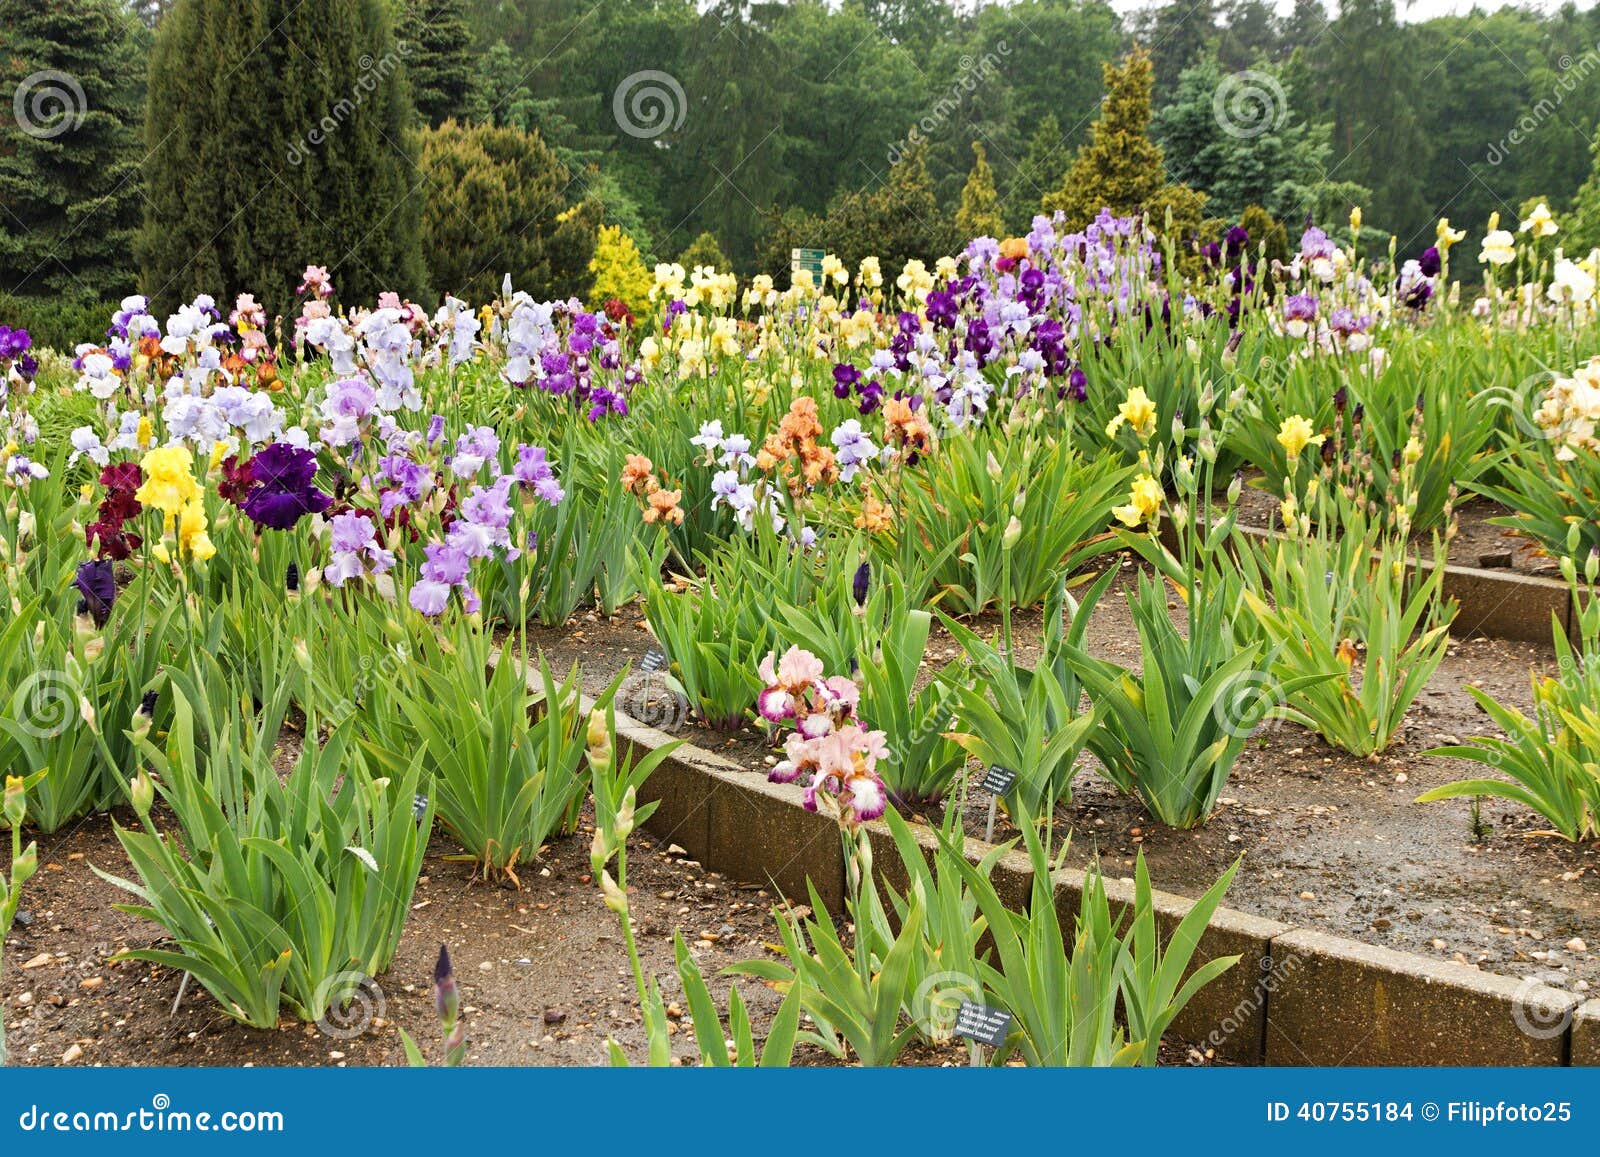 Group of irises stock photo. Image of blooming, blossom - 40755184